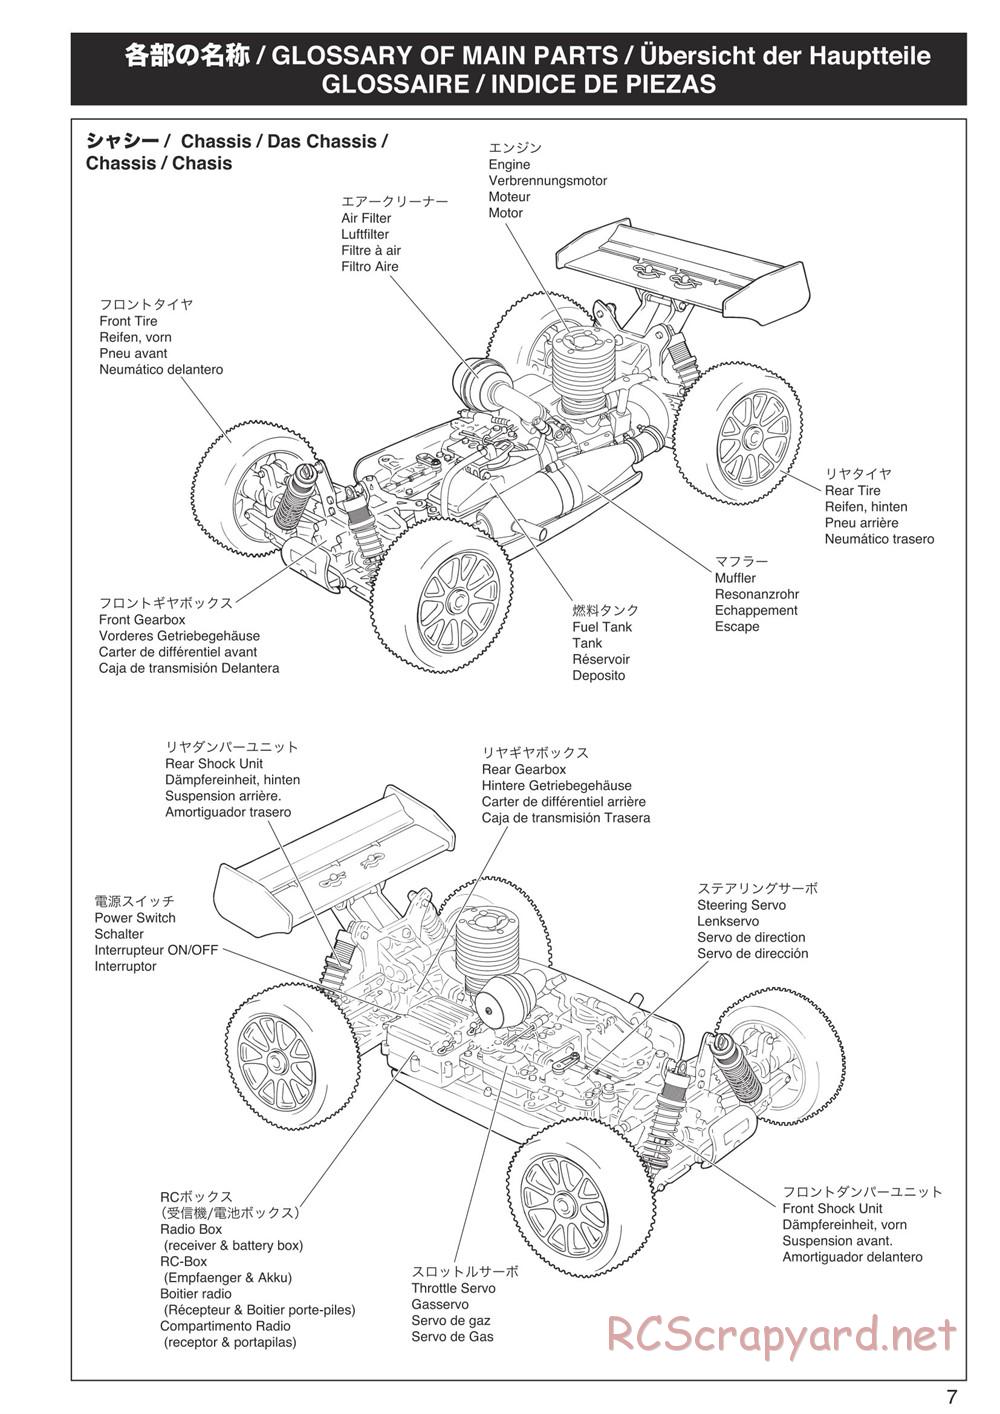 Kyosho - Inferno Neo 3.0 - Manual - Page 7